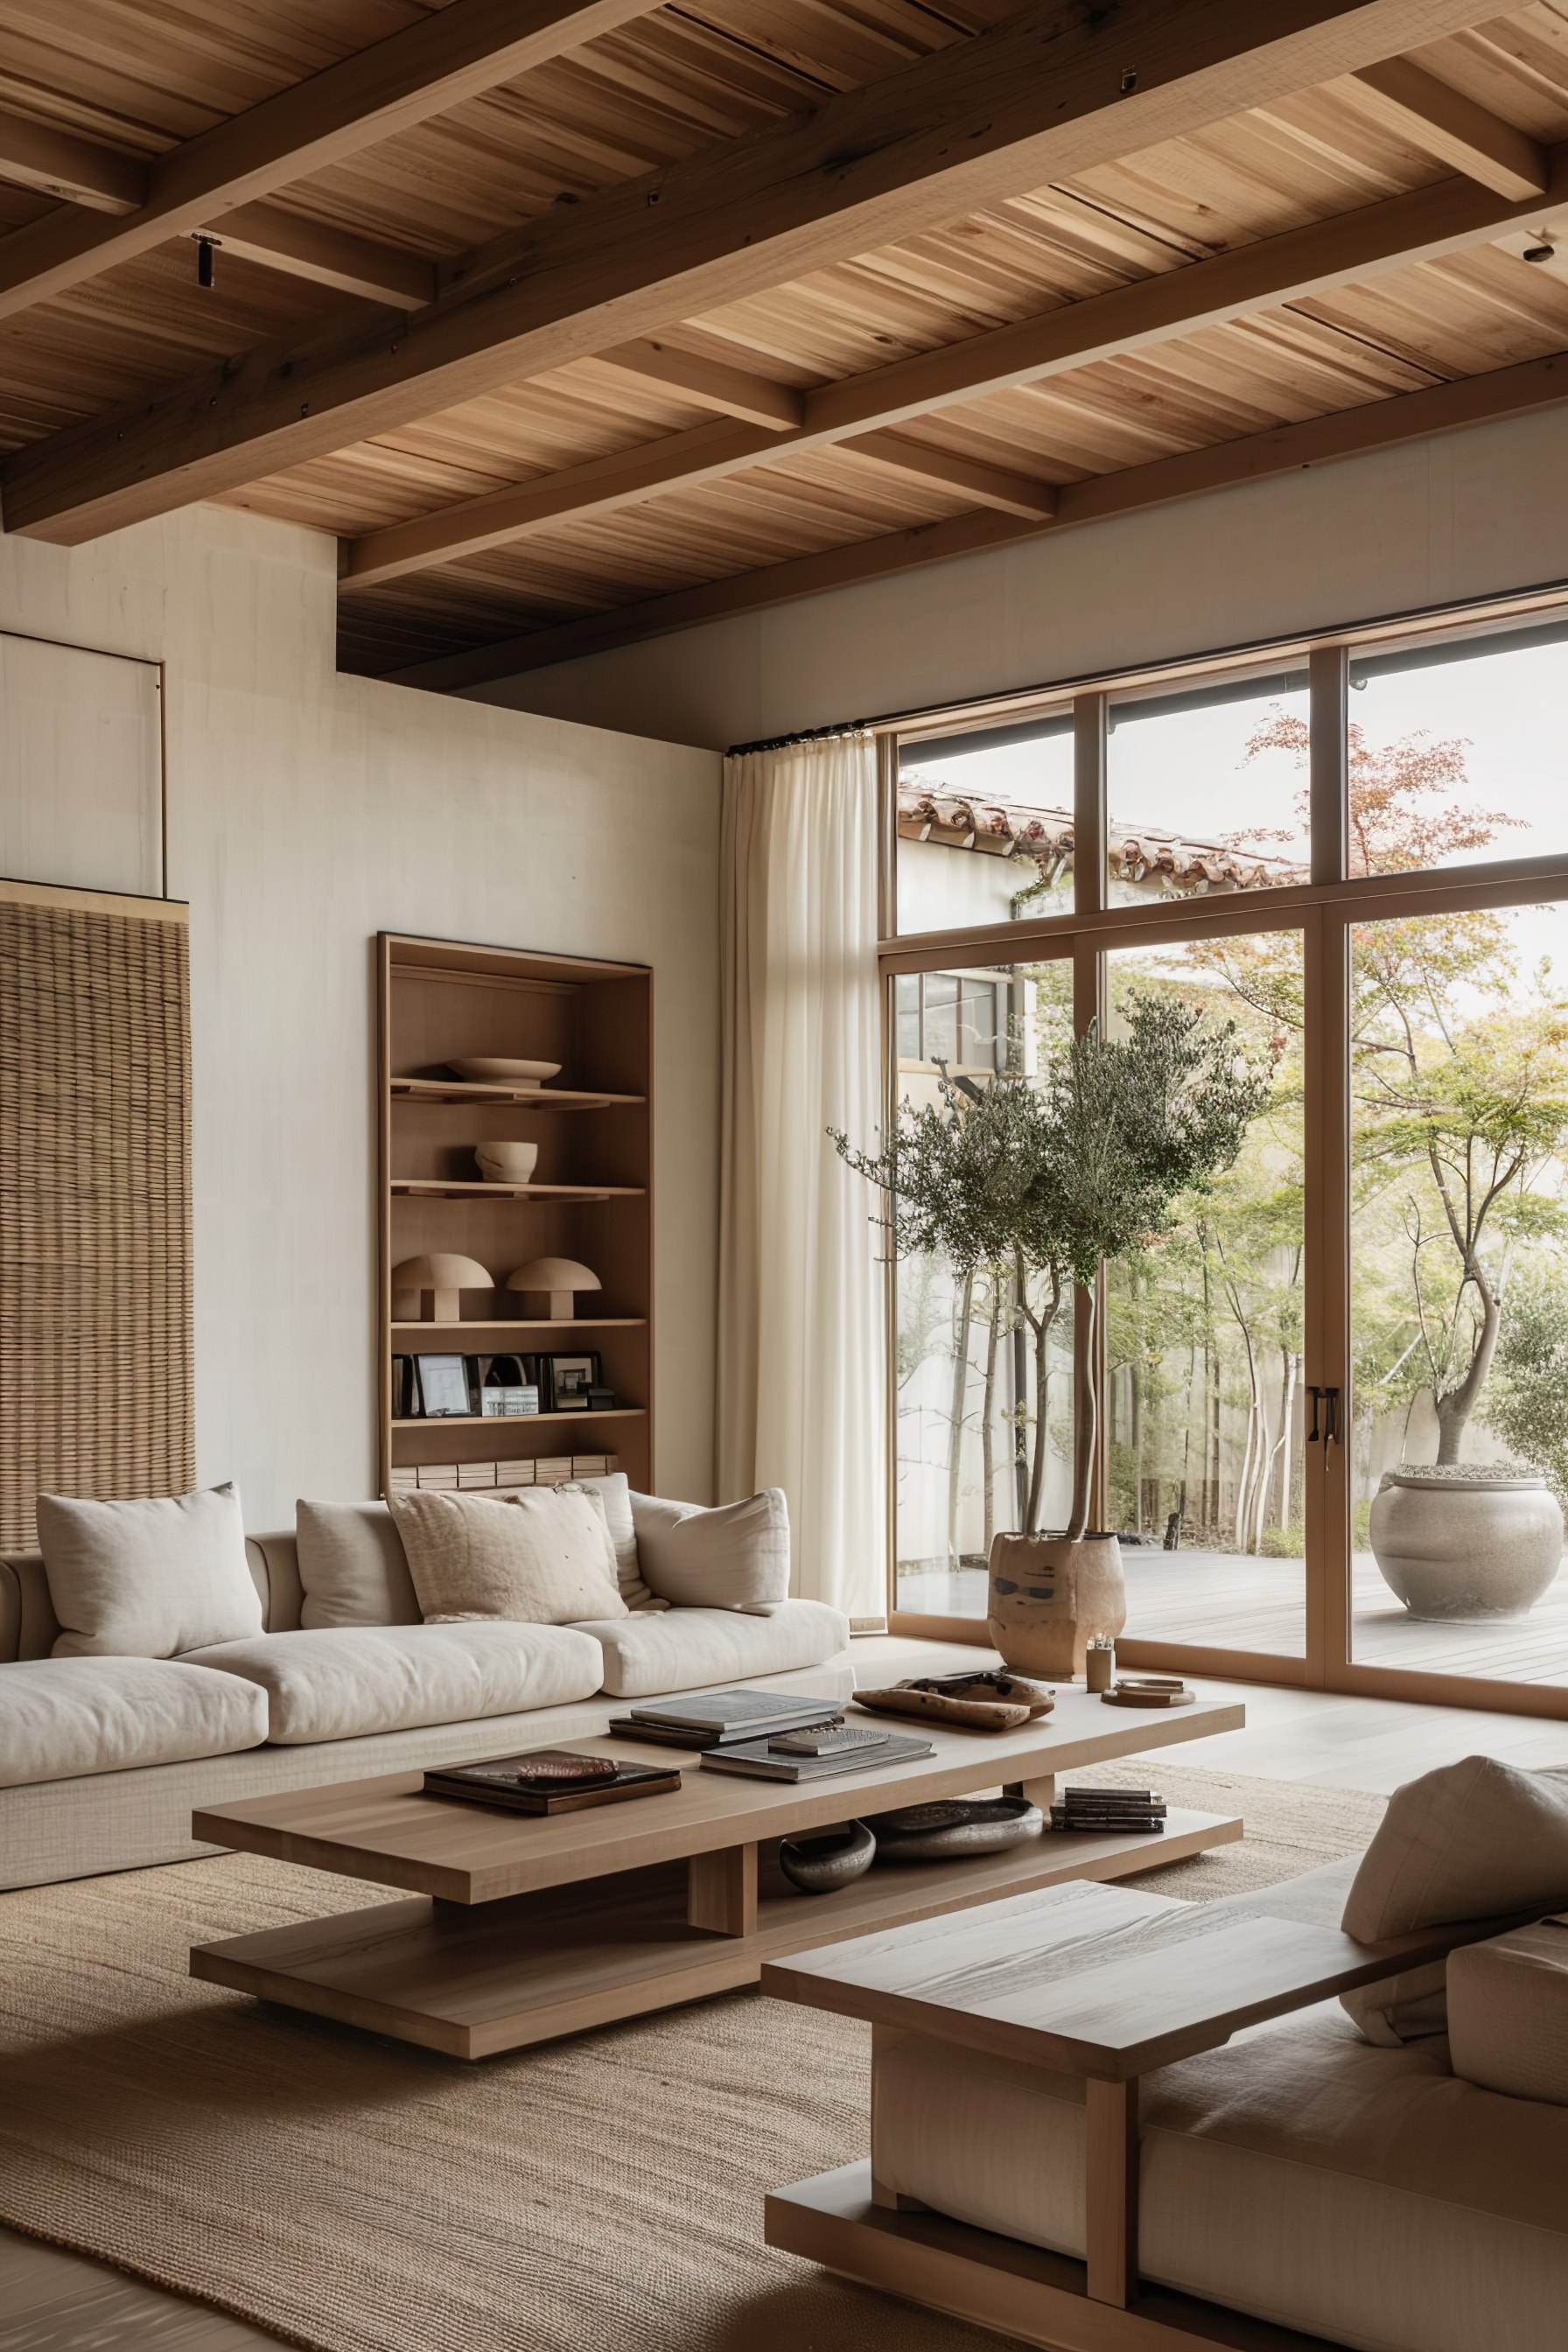 Minimalist living room with wooden ceiling and furniture, large window overlooking trees, and a neutral color palette.